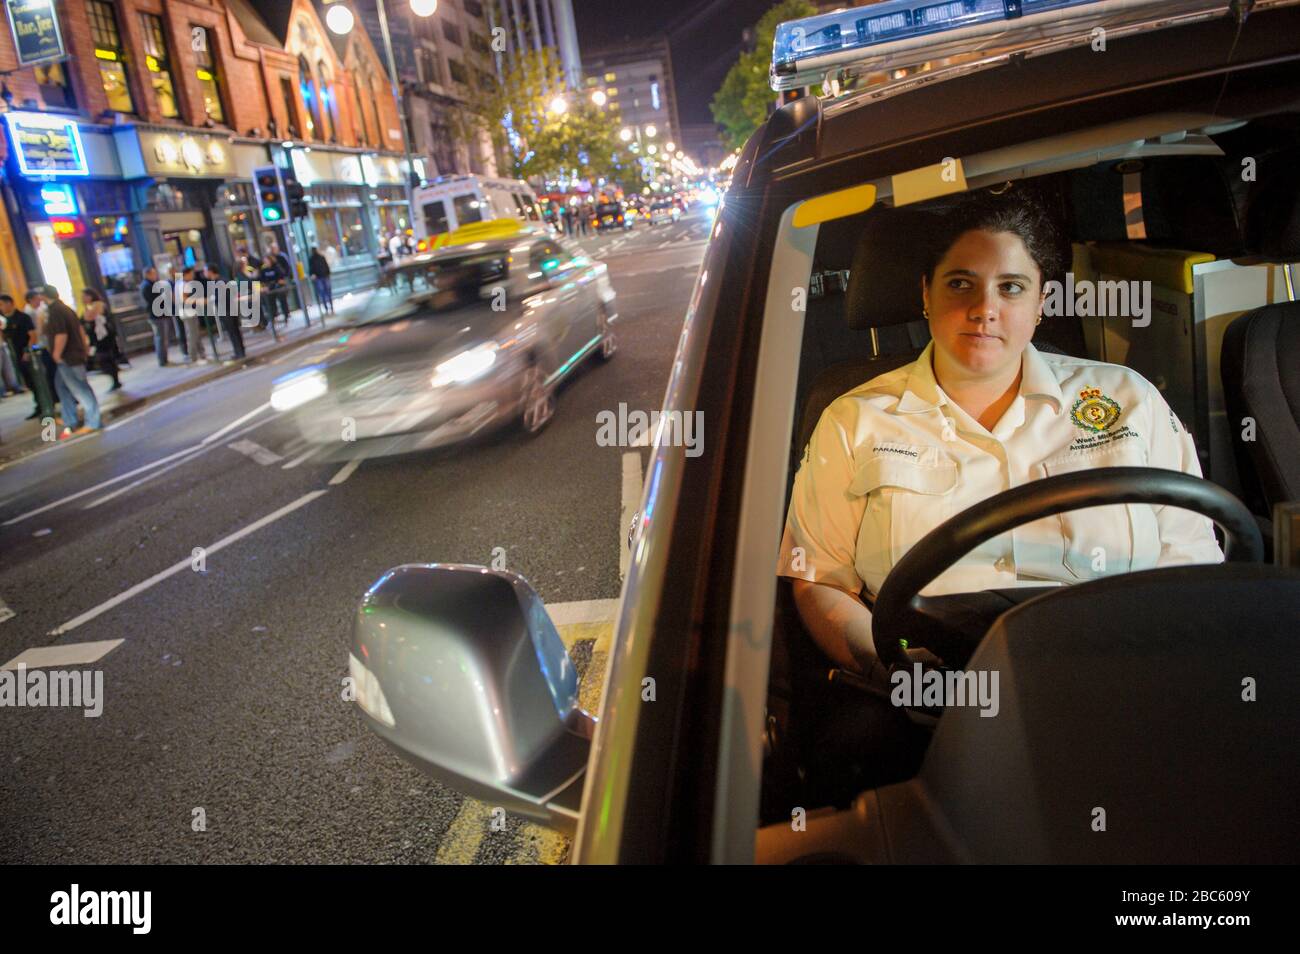 Young female Paramedic waiting in her emergency veircle Birmingham City Centre on a busy Saturday night. Stock Photo